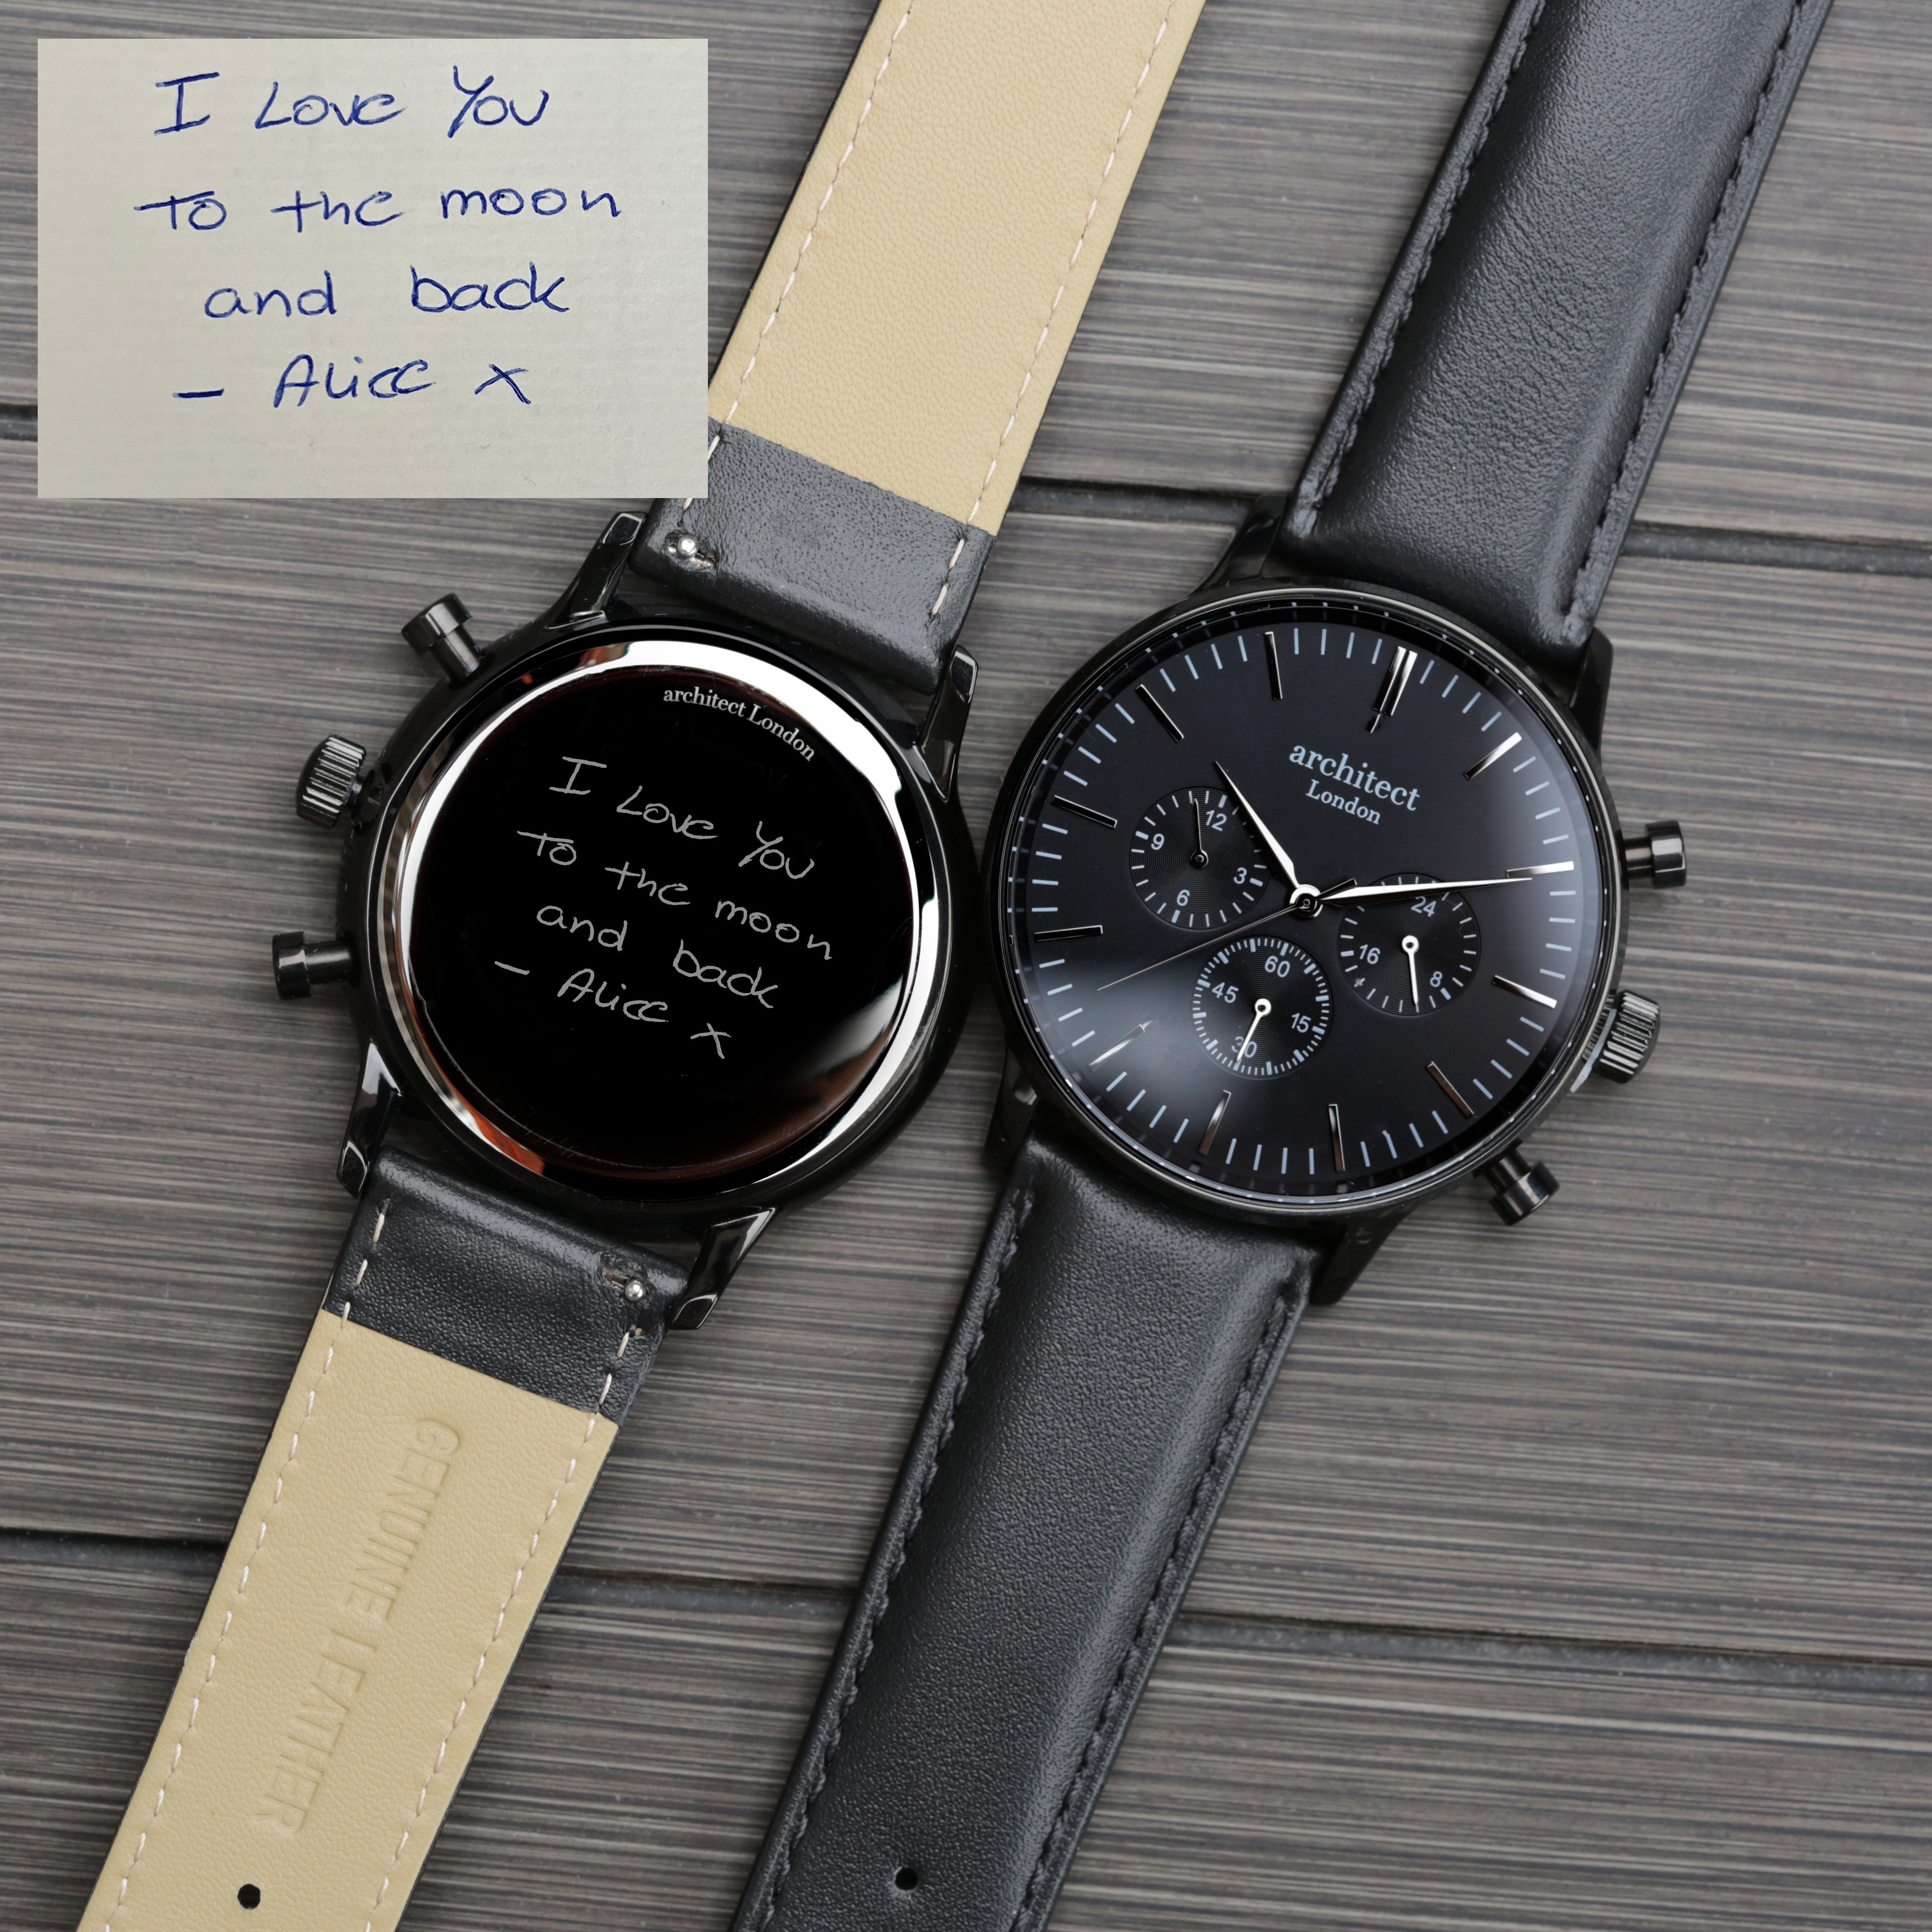 Handwriting Engraving - Men's Architect Motivator in Black with Black Leather Strap